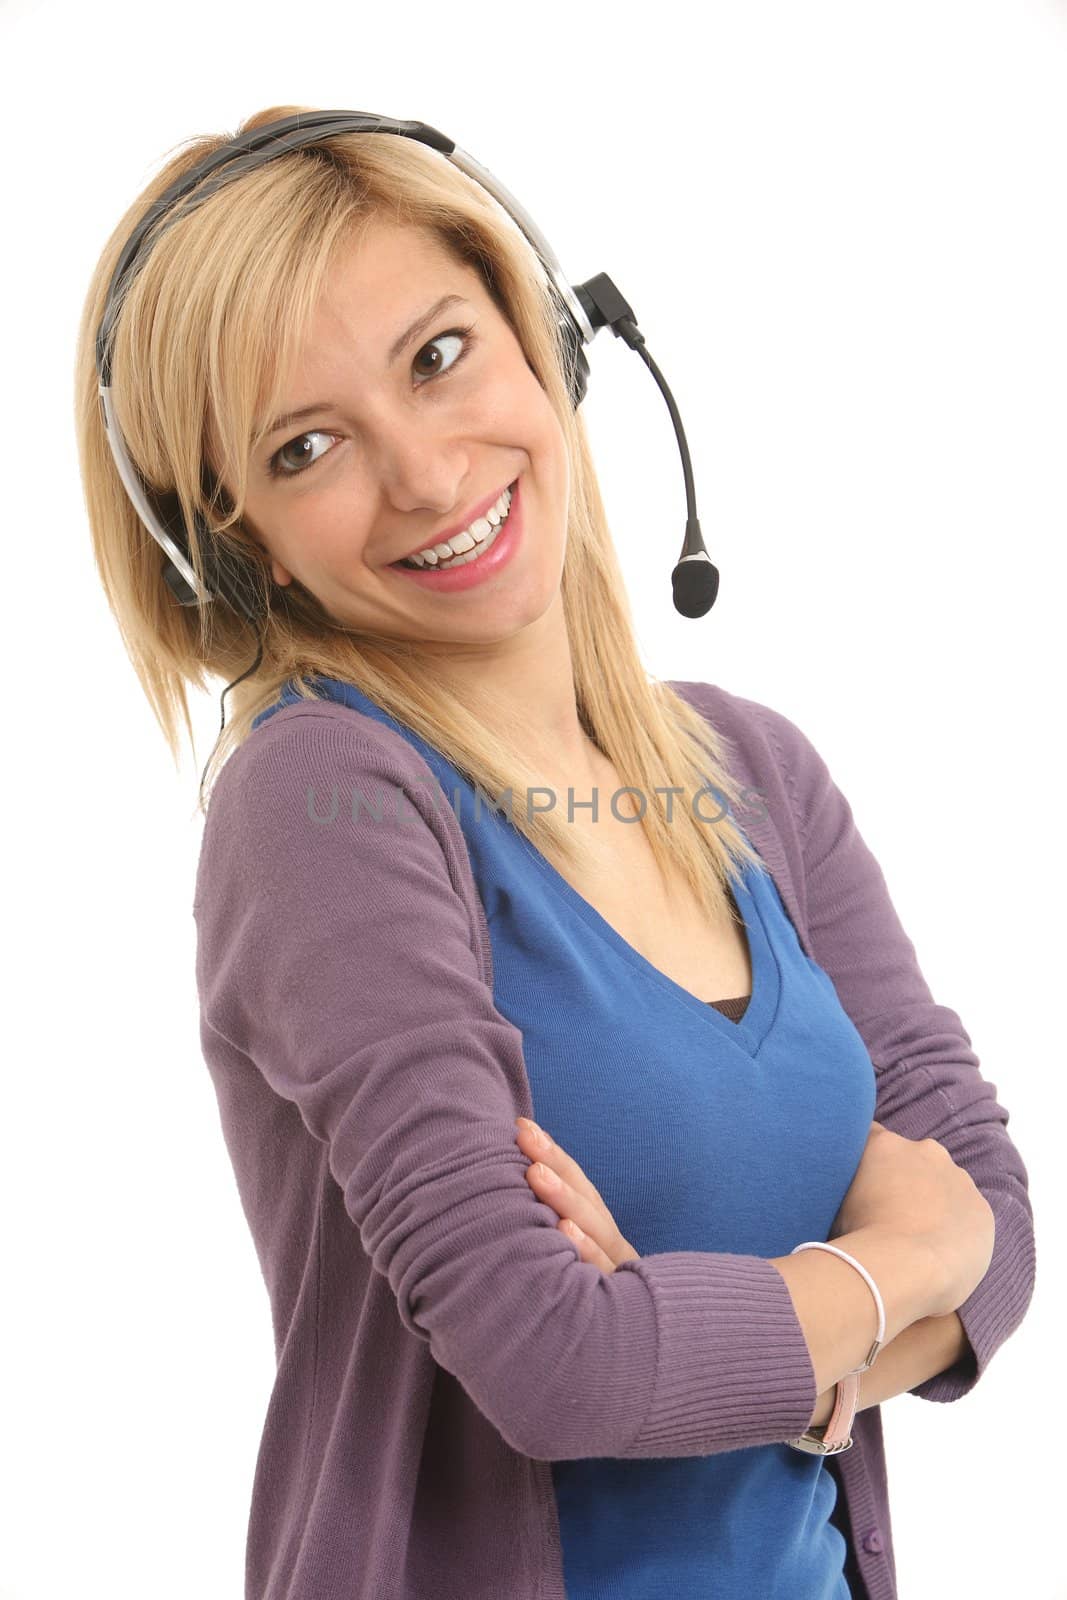 A smiling blonde girl answering with a headset